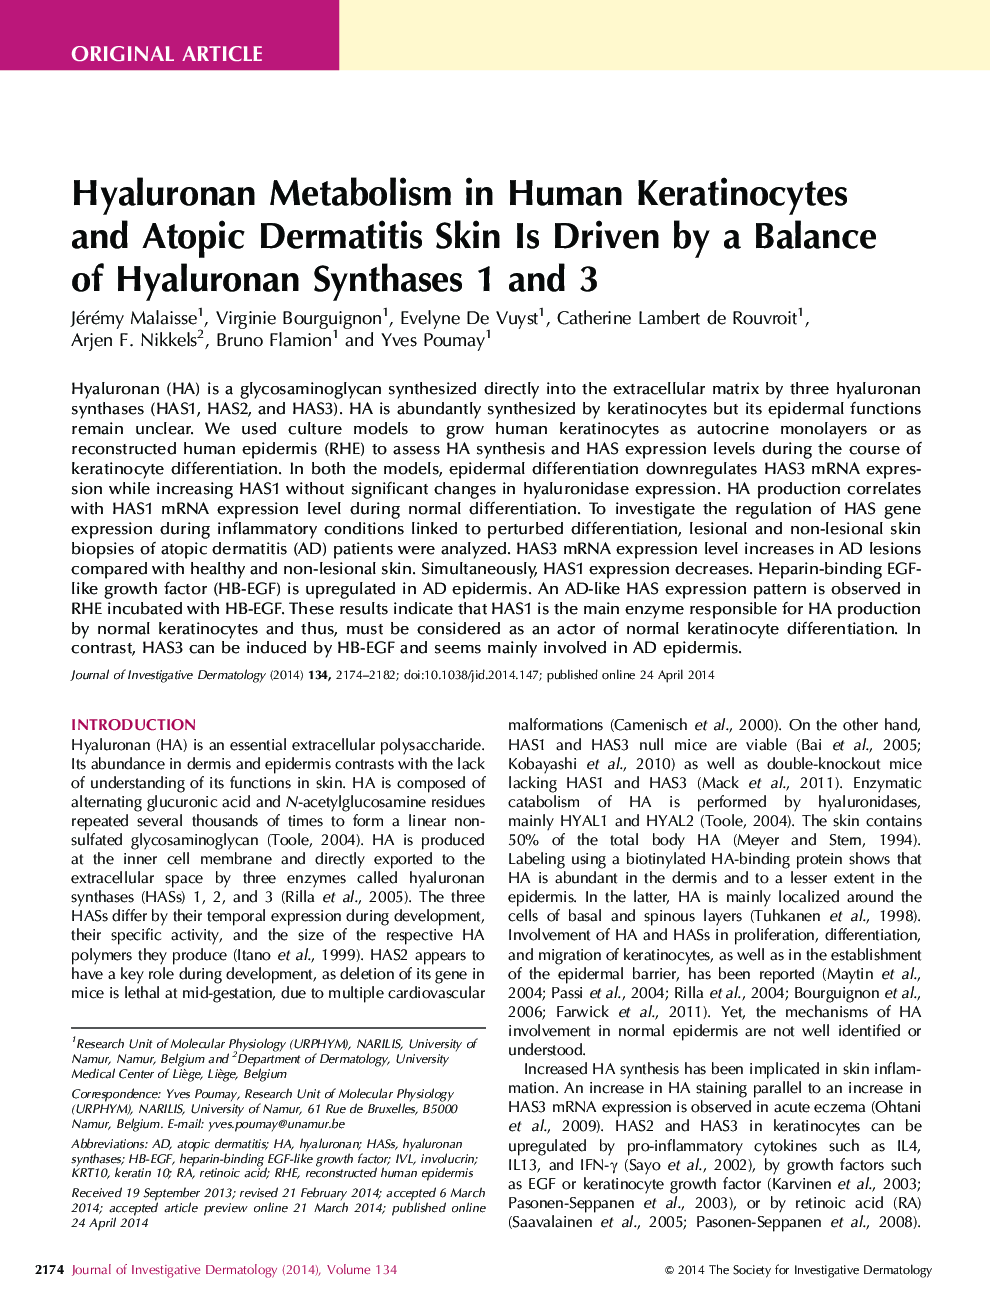 Original ArticleHyaluronan Metabolism in Human Keratinocytes and Atopic Dermatitis Skin Is Driven by a Balance of Hyaluronan Synthases 1 and 3